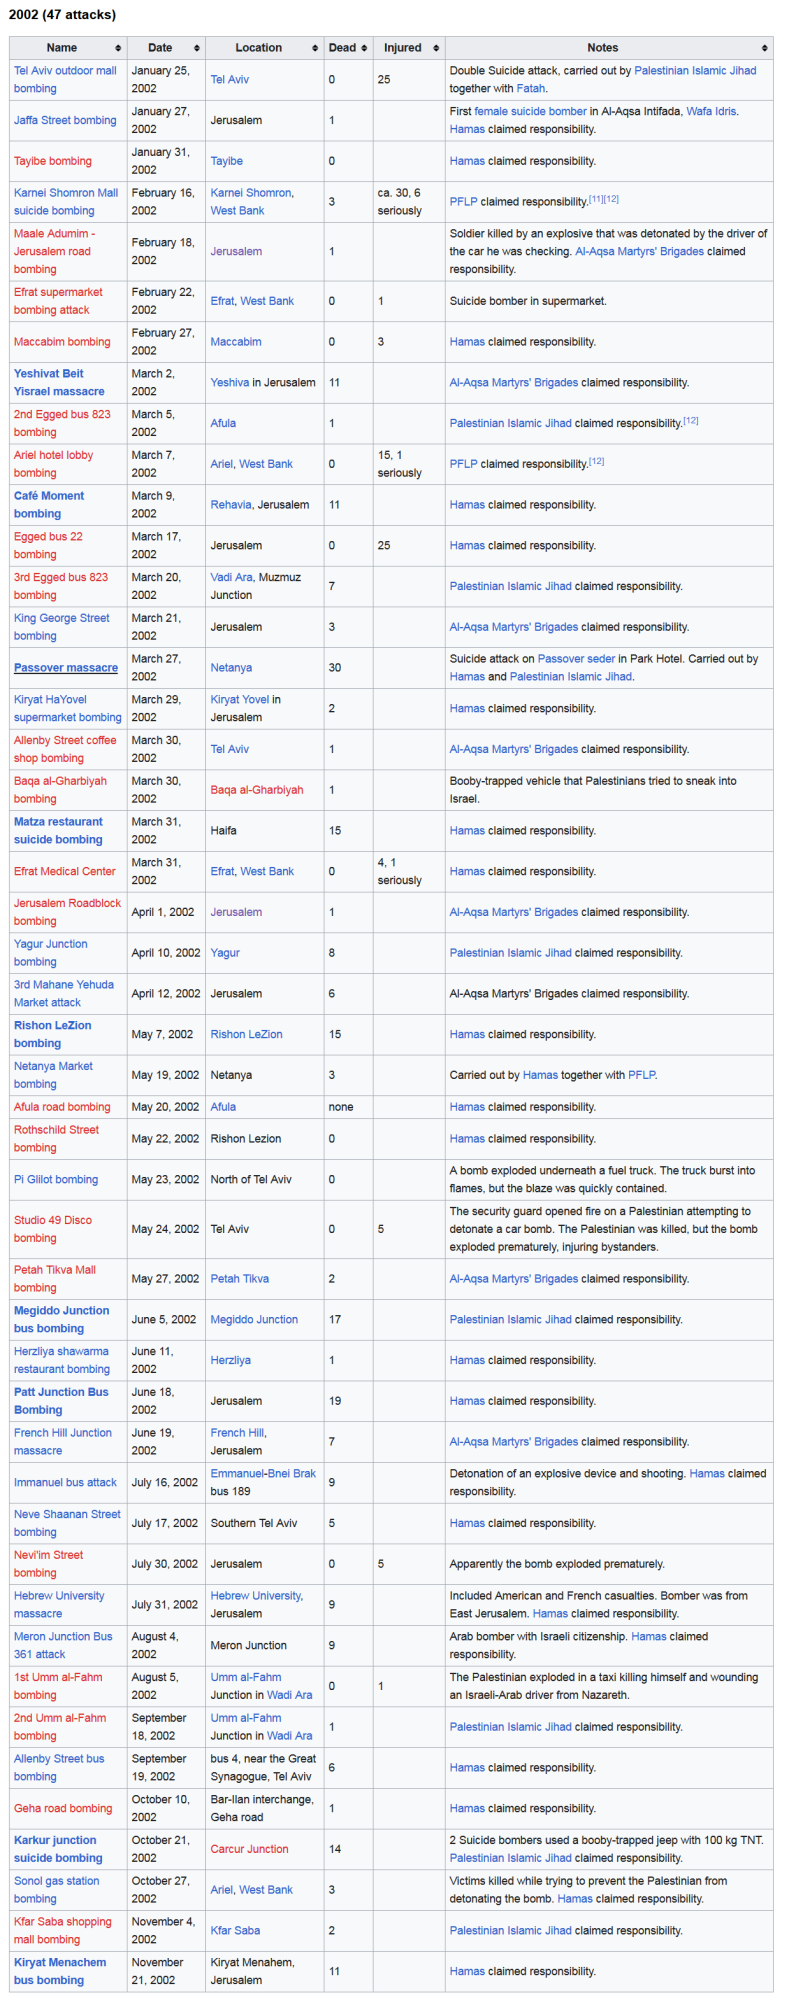 Screenshot_2023-04-08 List of Palestinian suicide attacks - Wikipedia(3).png